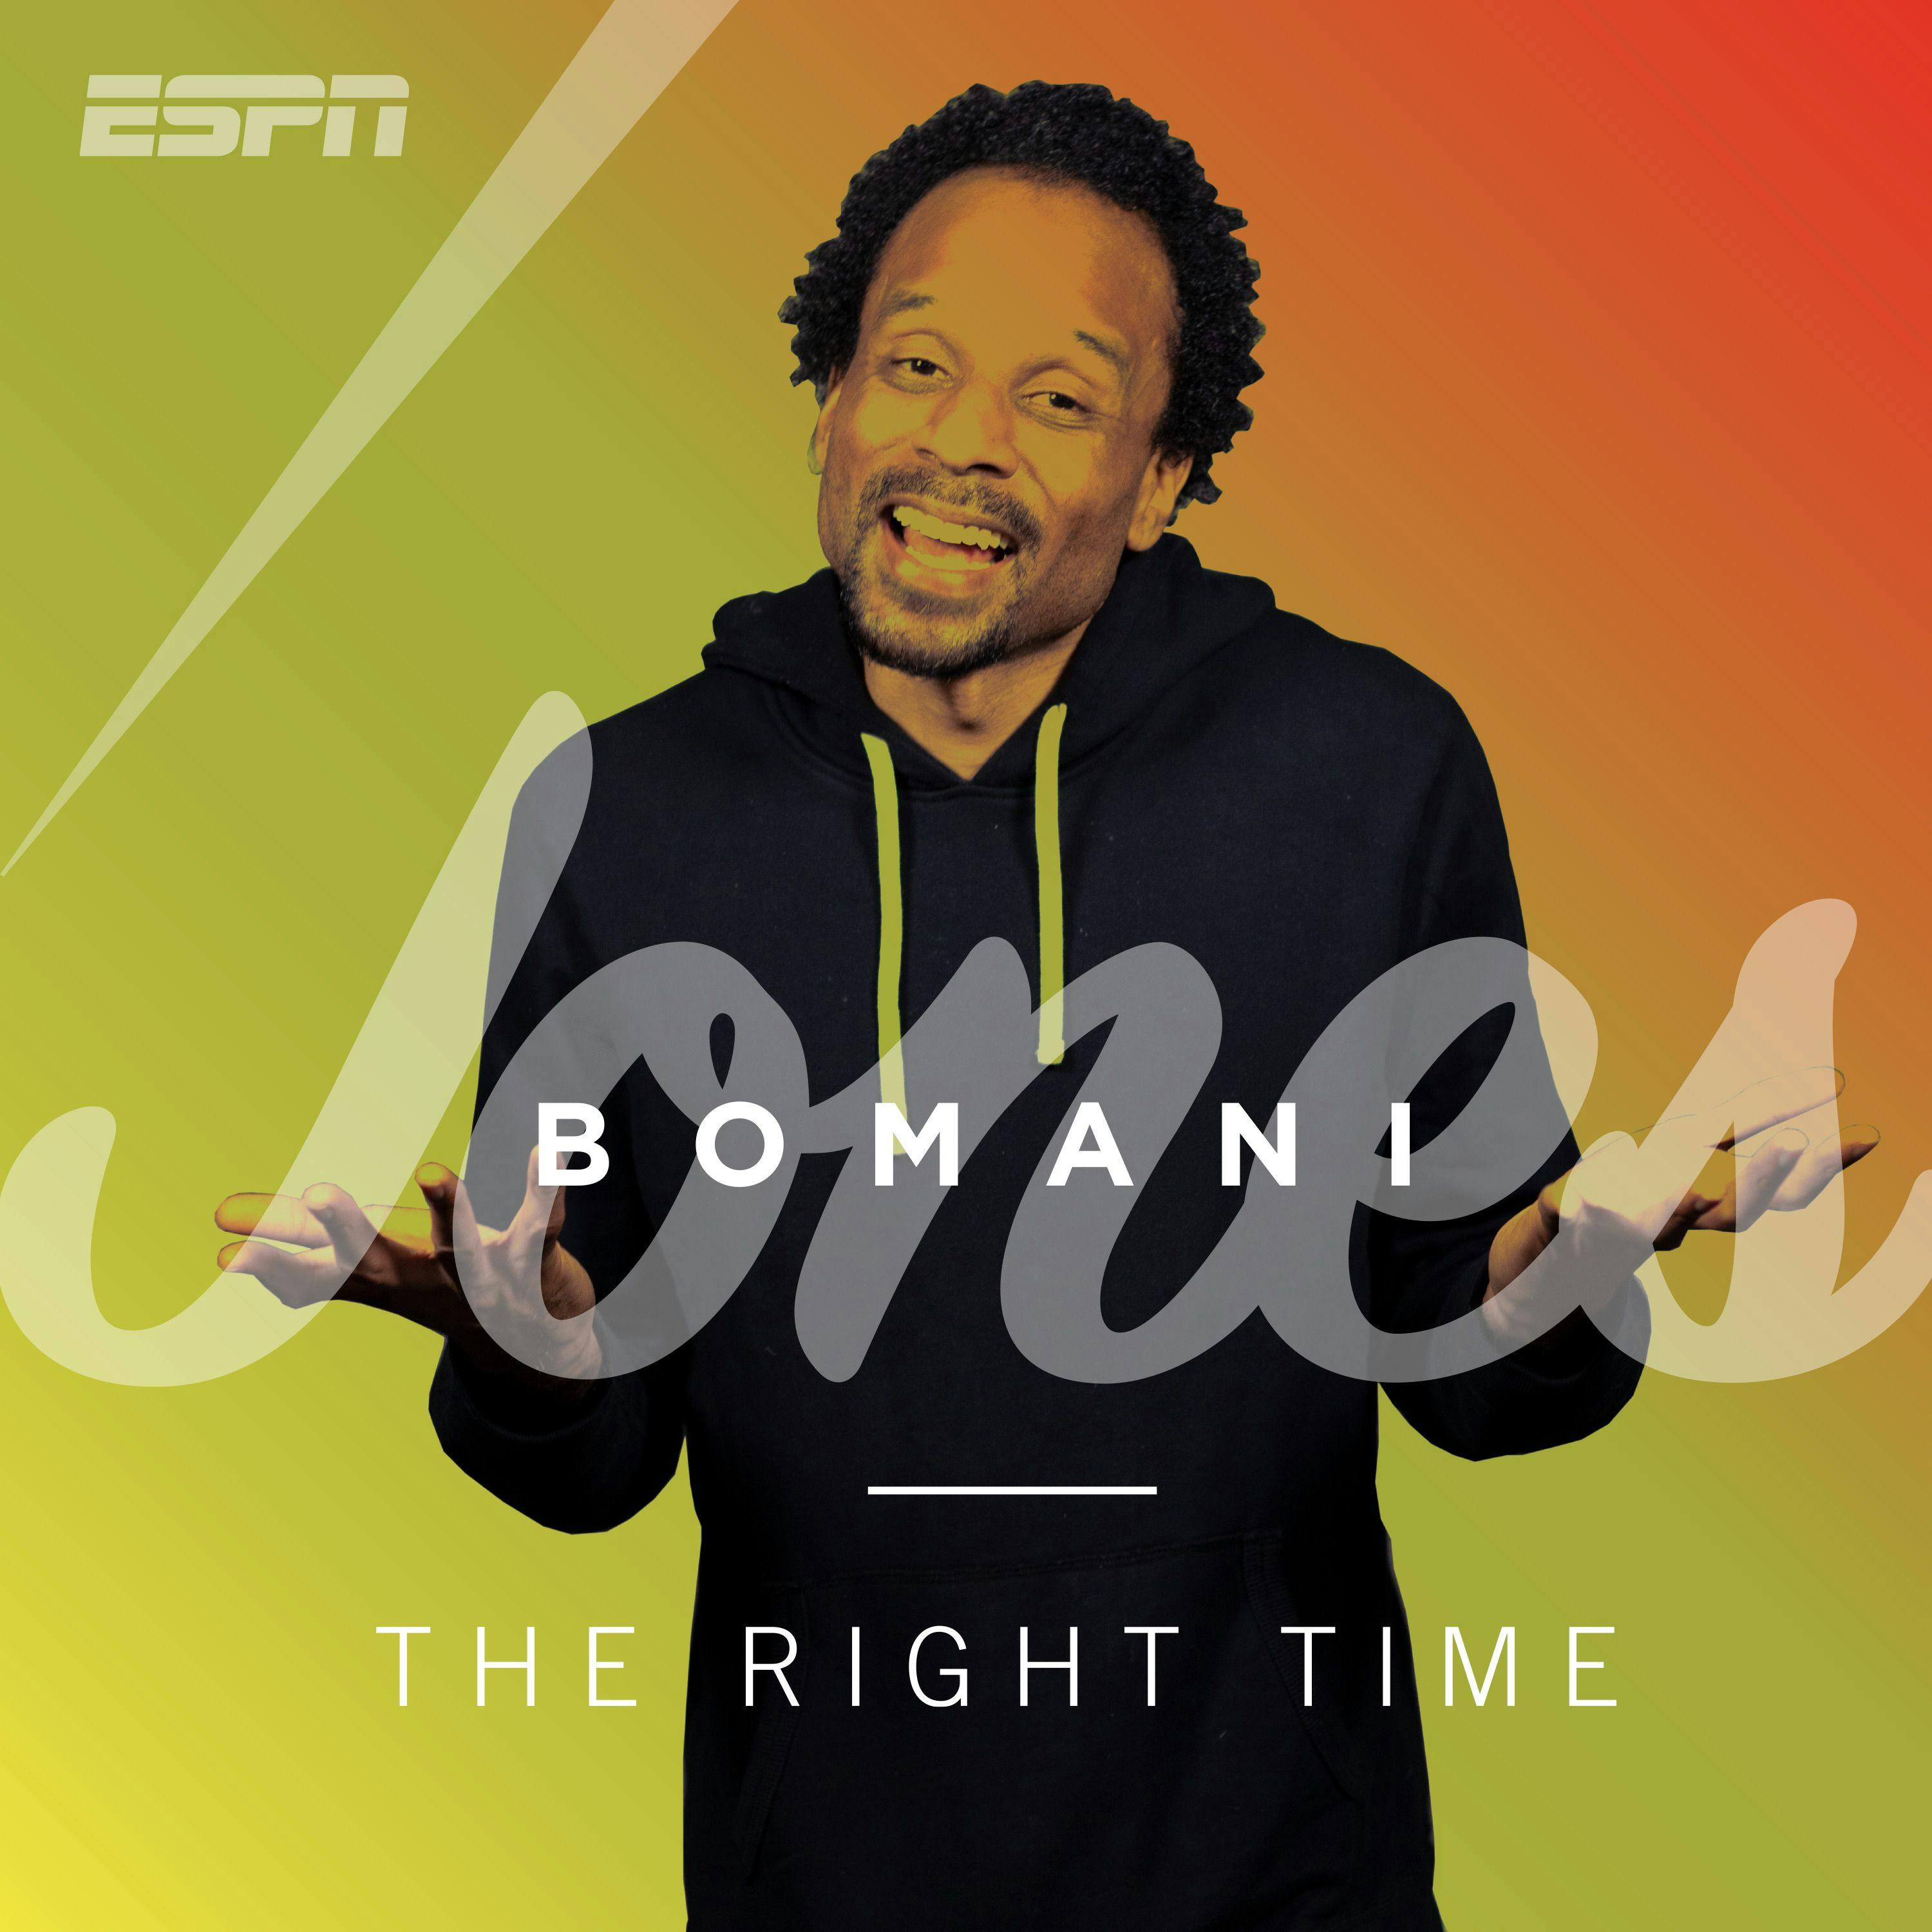 Teacher Black Mail Student Force Xxxvideo - The Right Time with Bomani Jones Show - PodCenter - ESPN Radio